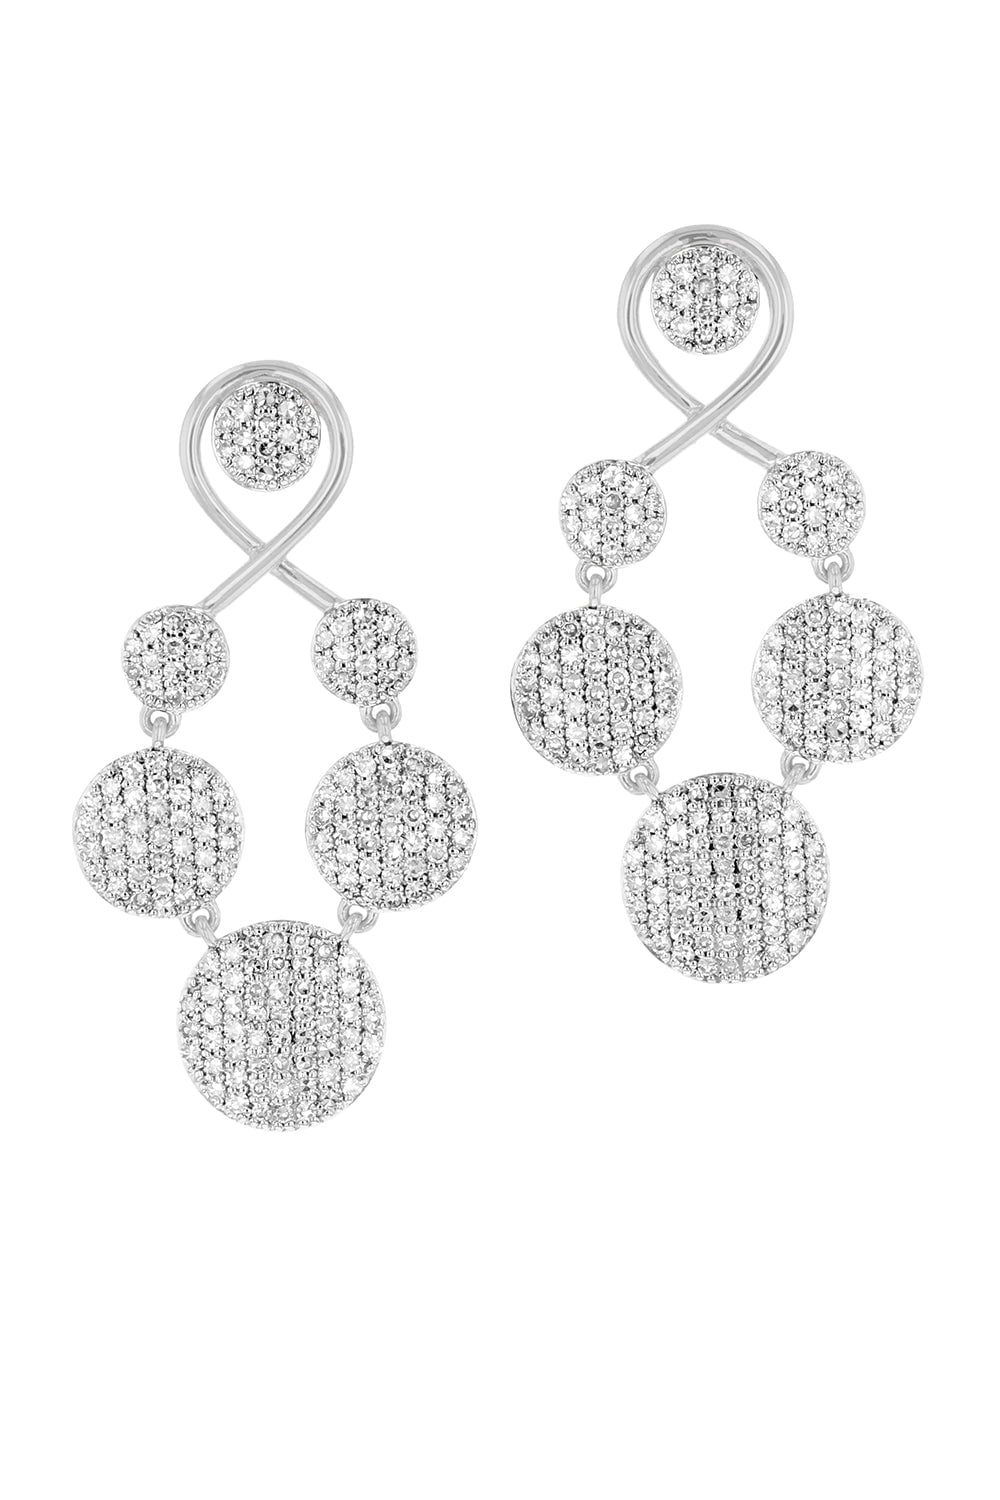 PHILLIPS HOUSE-Infinity Graduated Loop Earrings-WHITE GOLD